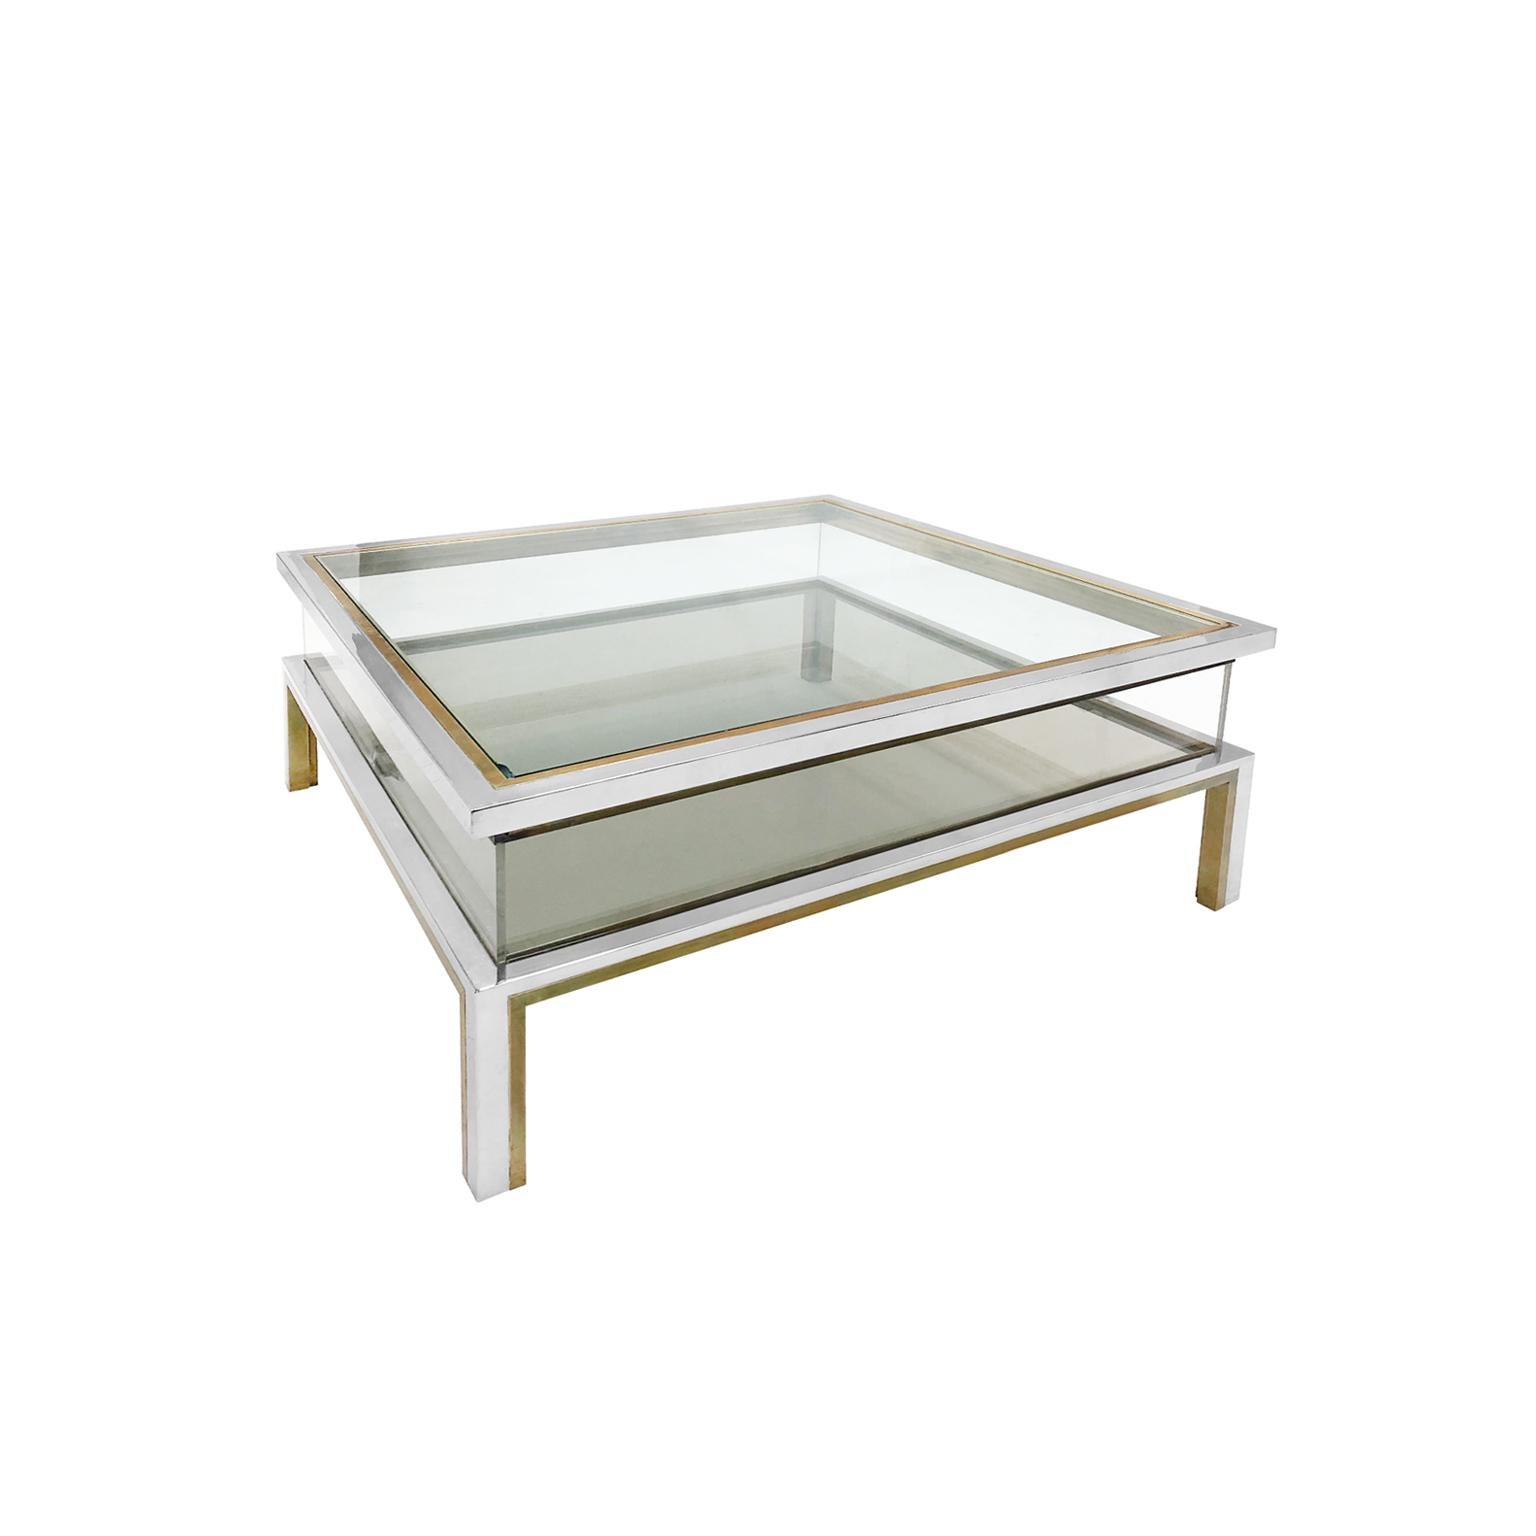 1970s French Glass and Lucite Sliding Top Vitrine Coffee Table by Maison Jansen (Französisch)